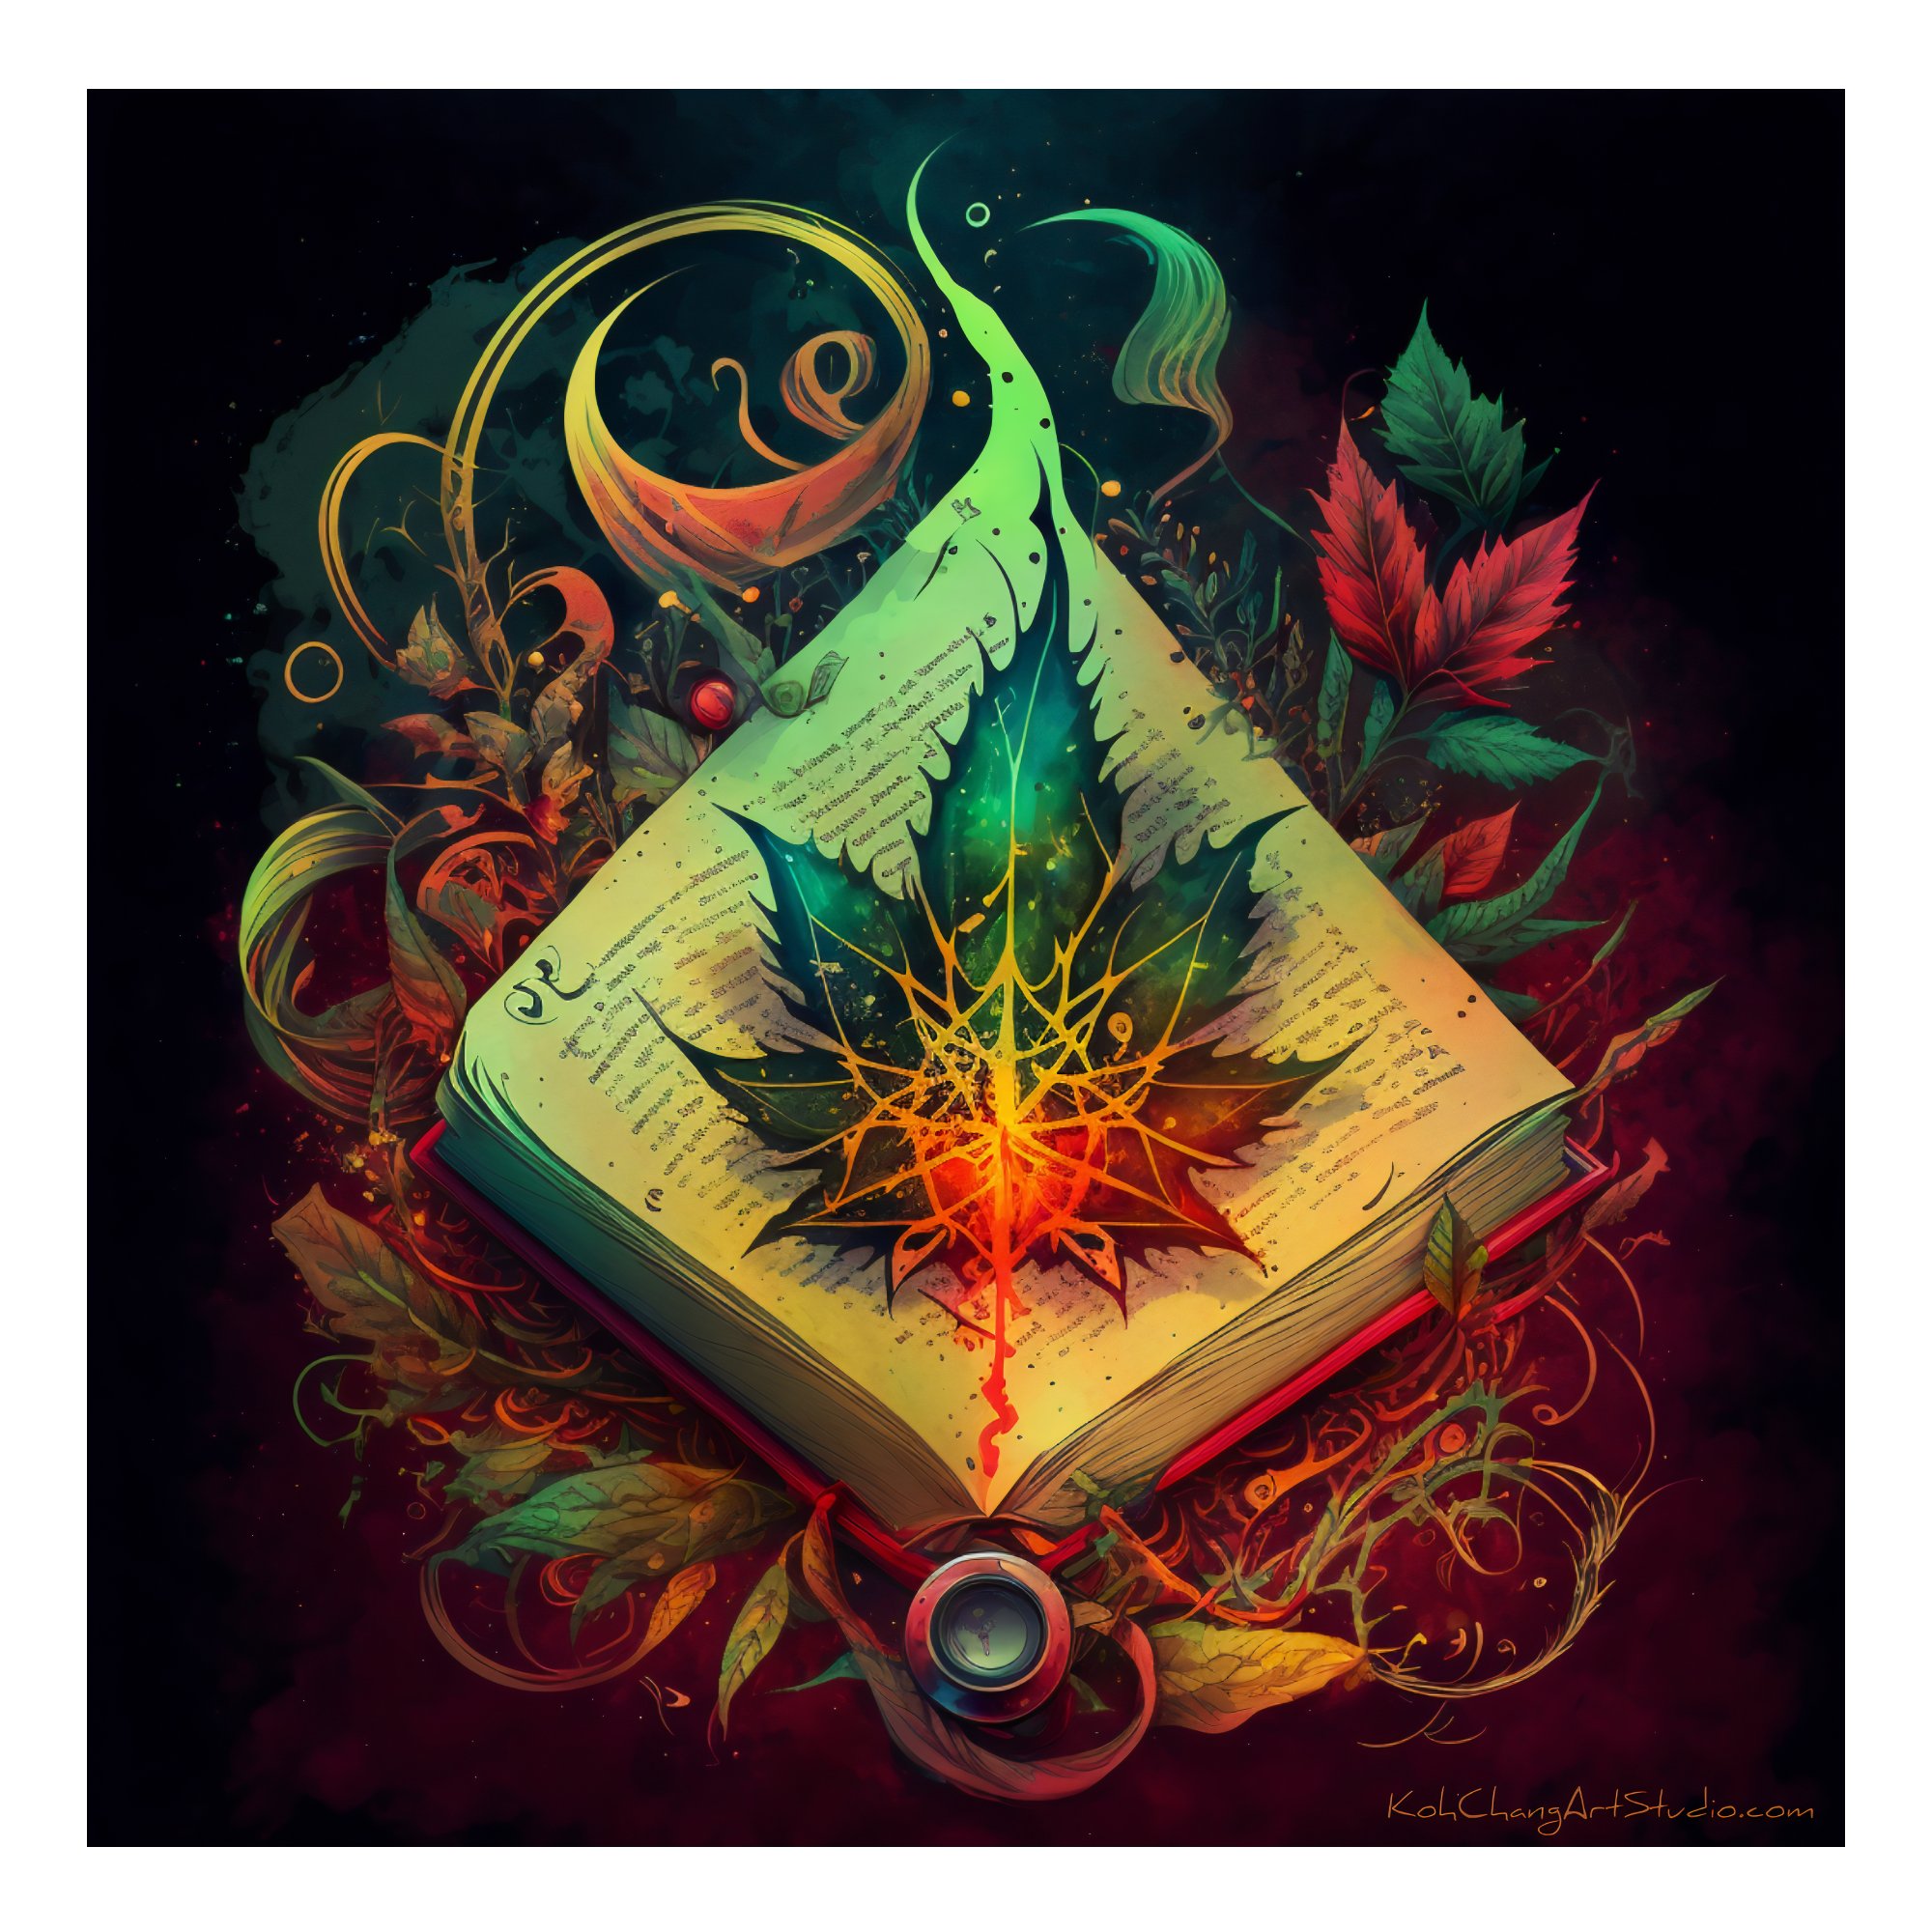 ALCHEMY Artistic Creation - Dragon entwined with a leaf, bearing a riddle of an herb with power and mystery.